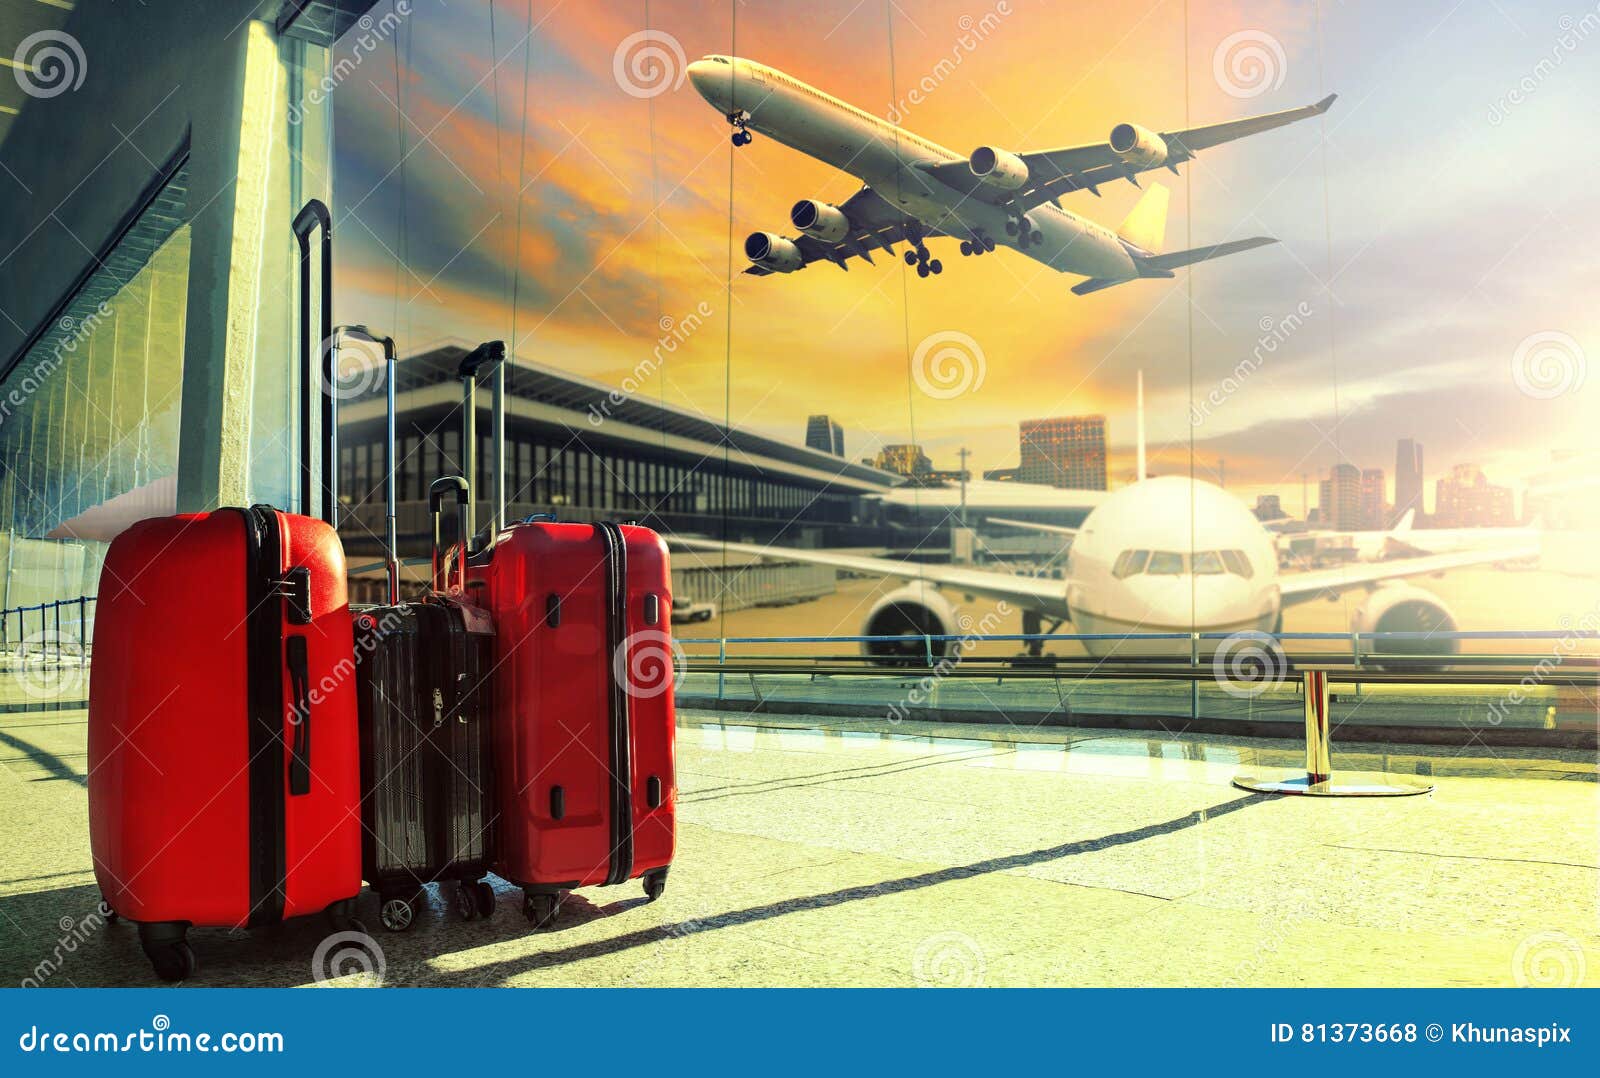 traveling luggage in airport terminal building and jet plane fly